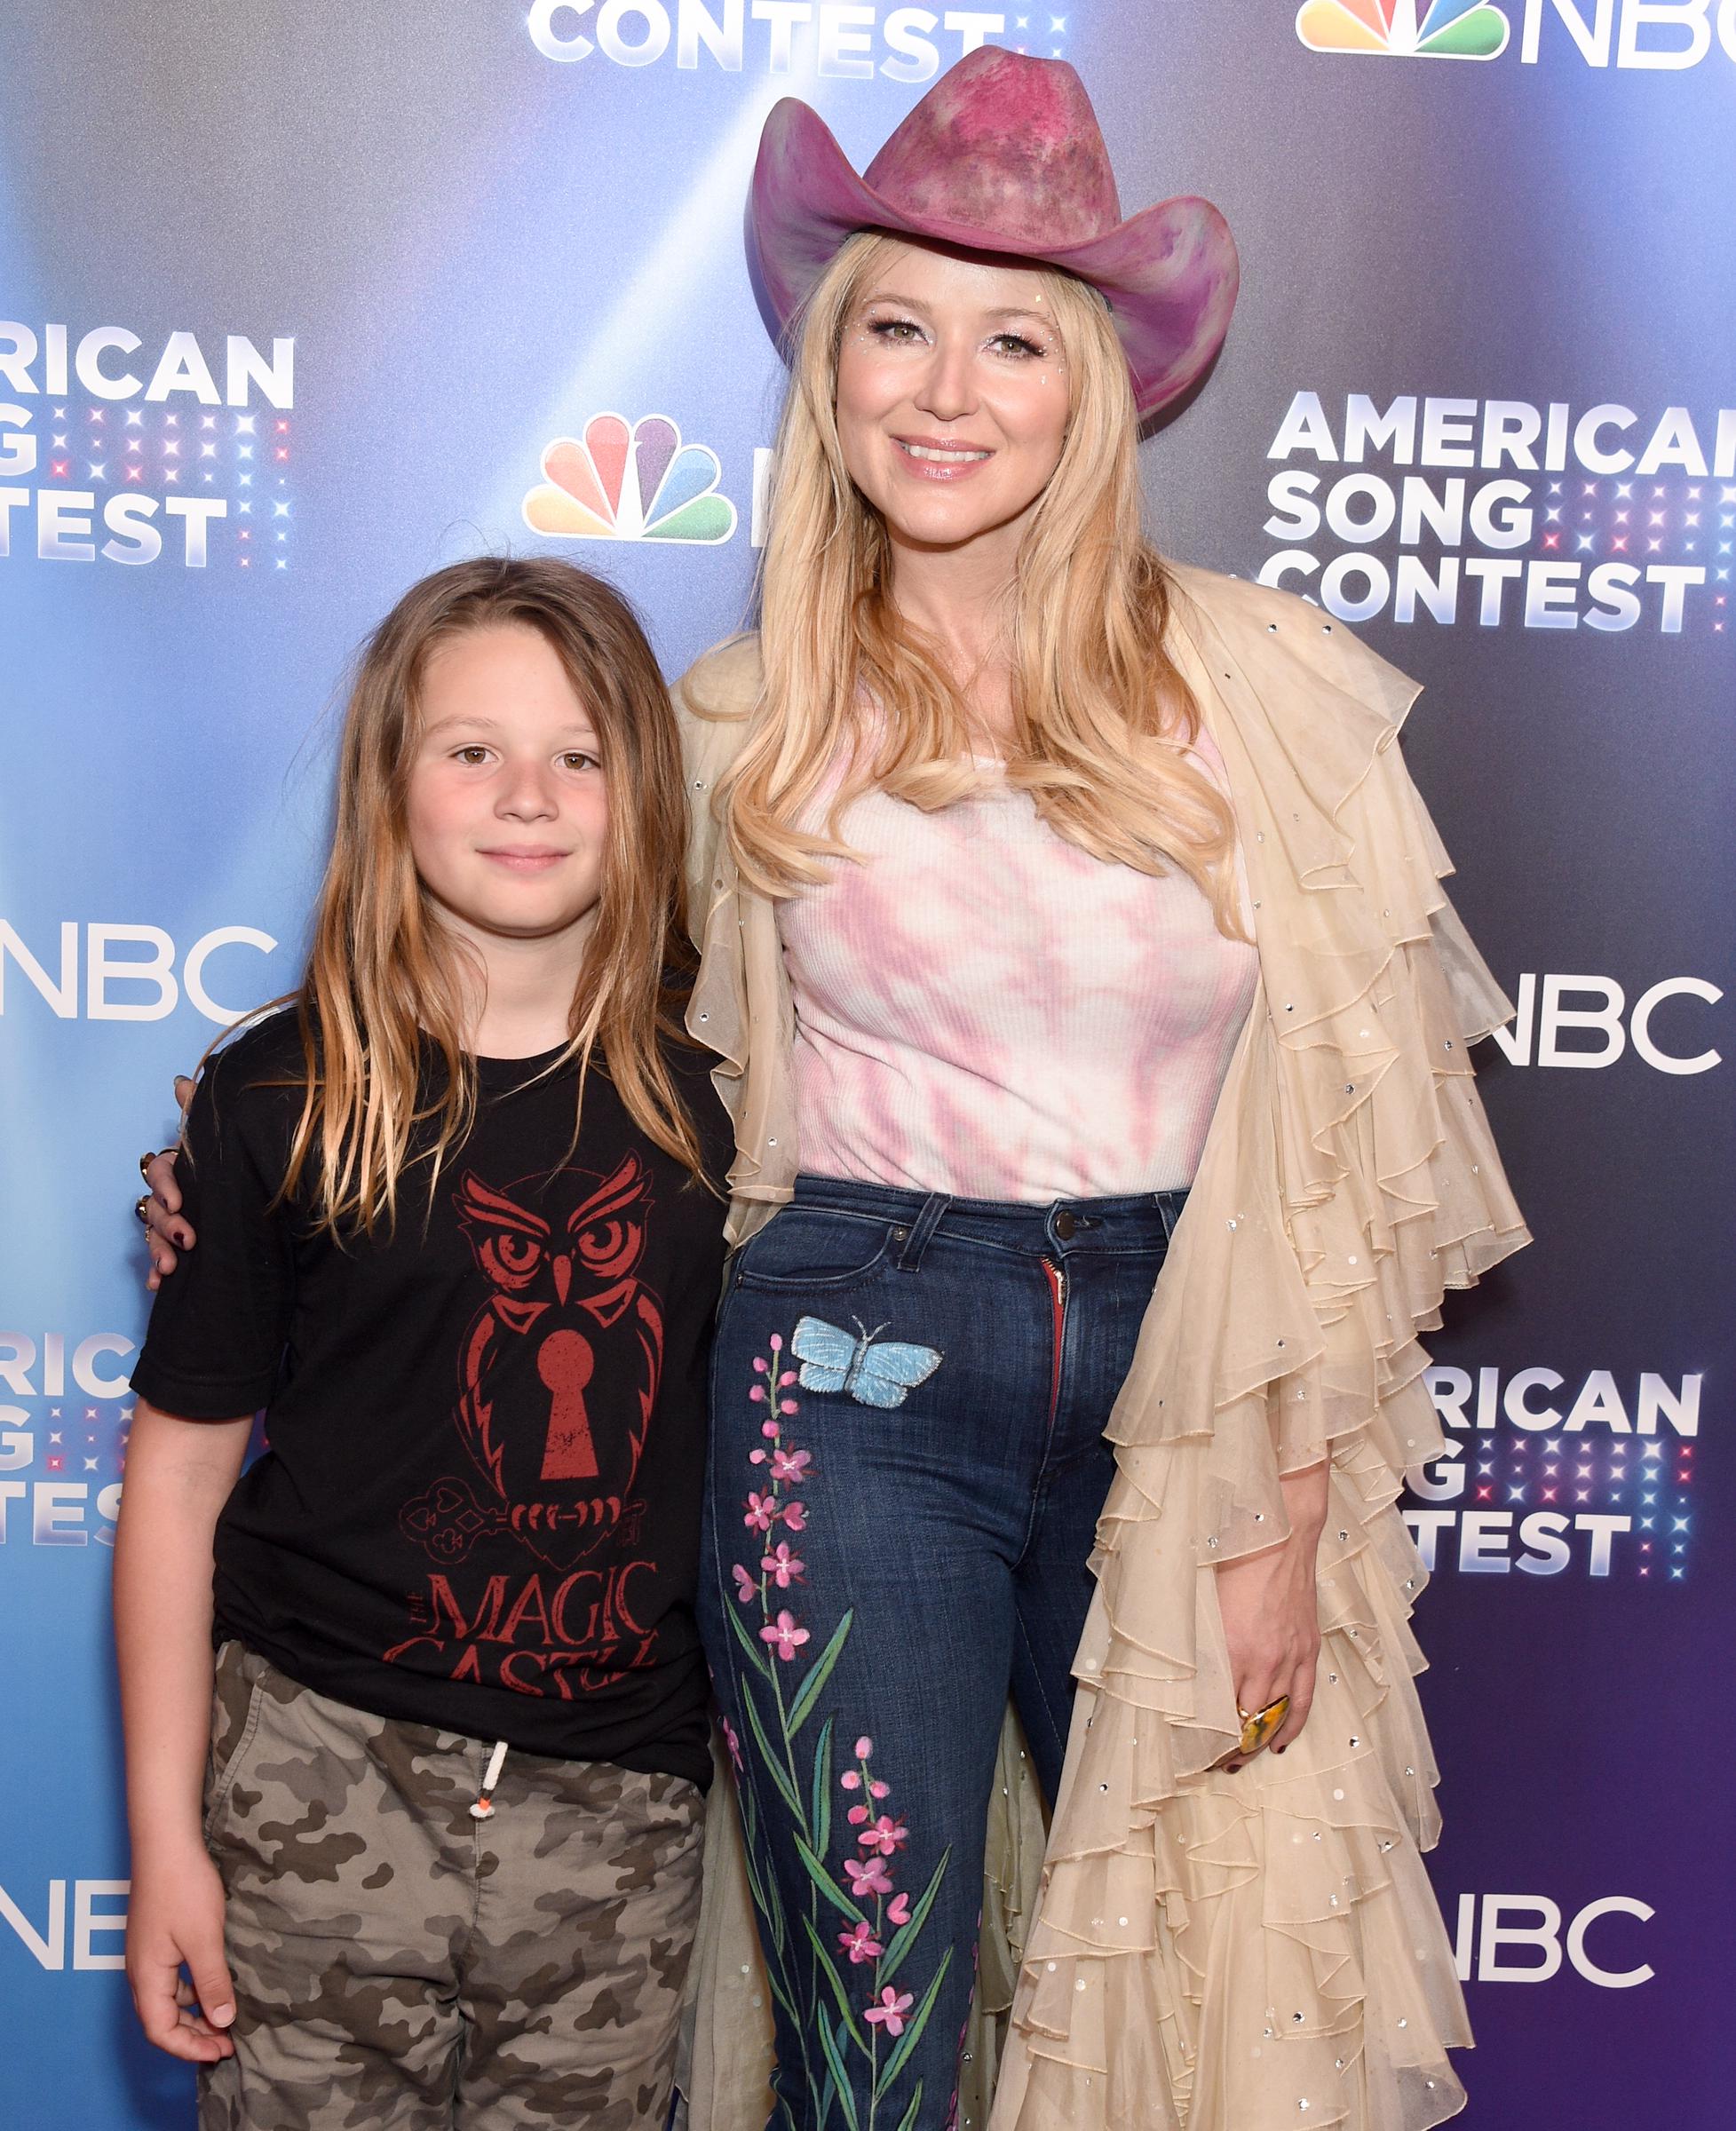 Kase Townes Murray and Jewel attend NBC's "American Song Contest" Week 3 in Universal City, California, on April 4, 2022. | Source: Getty Images